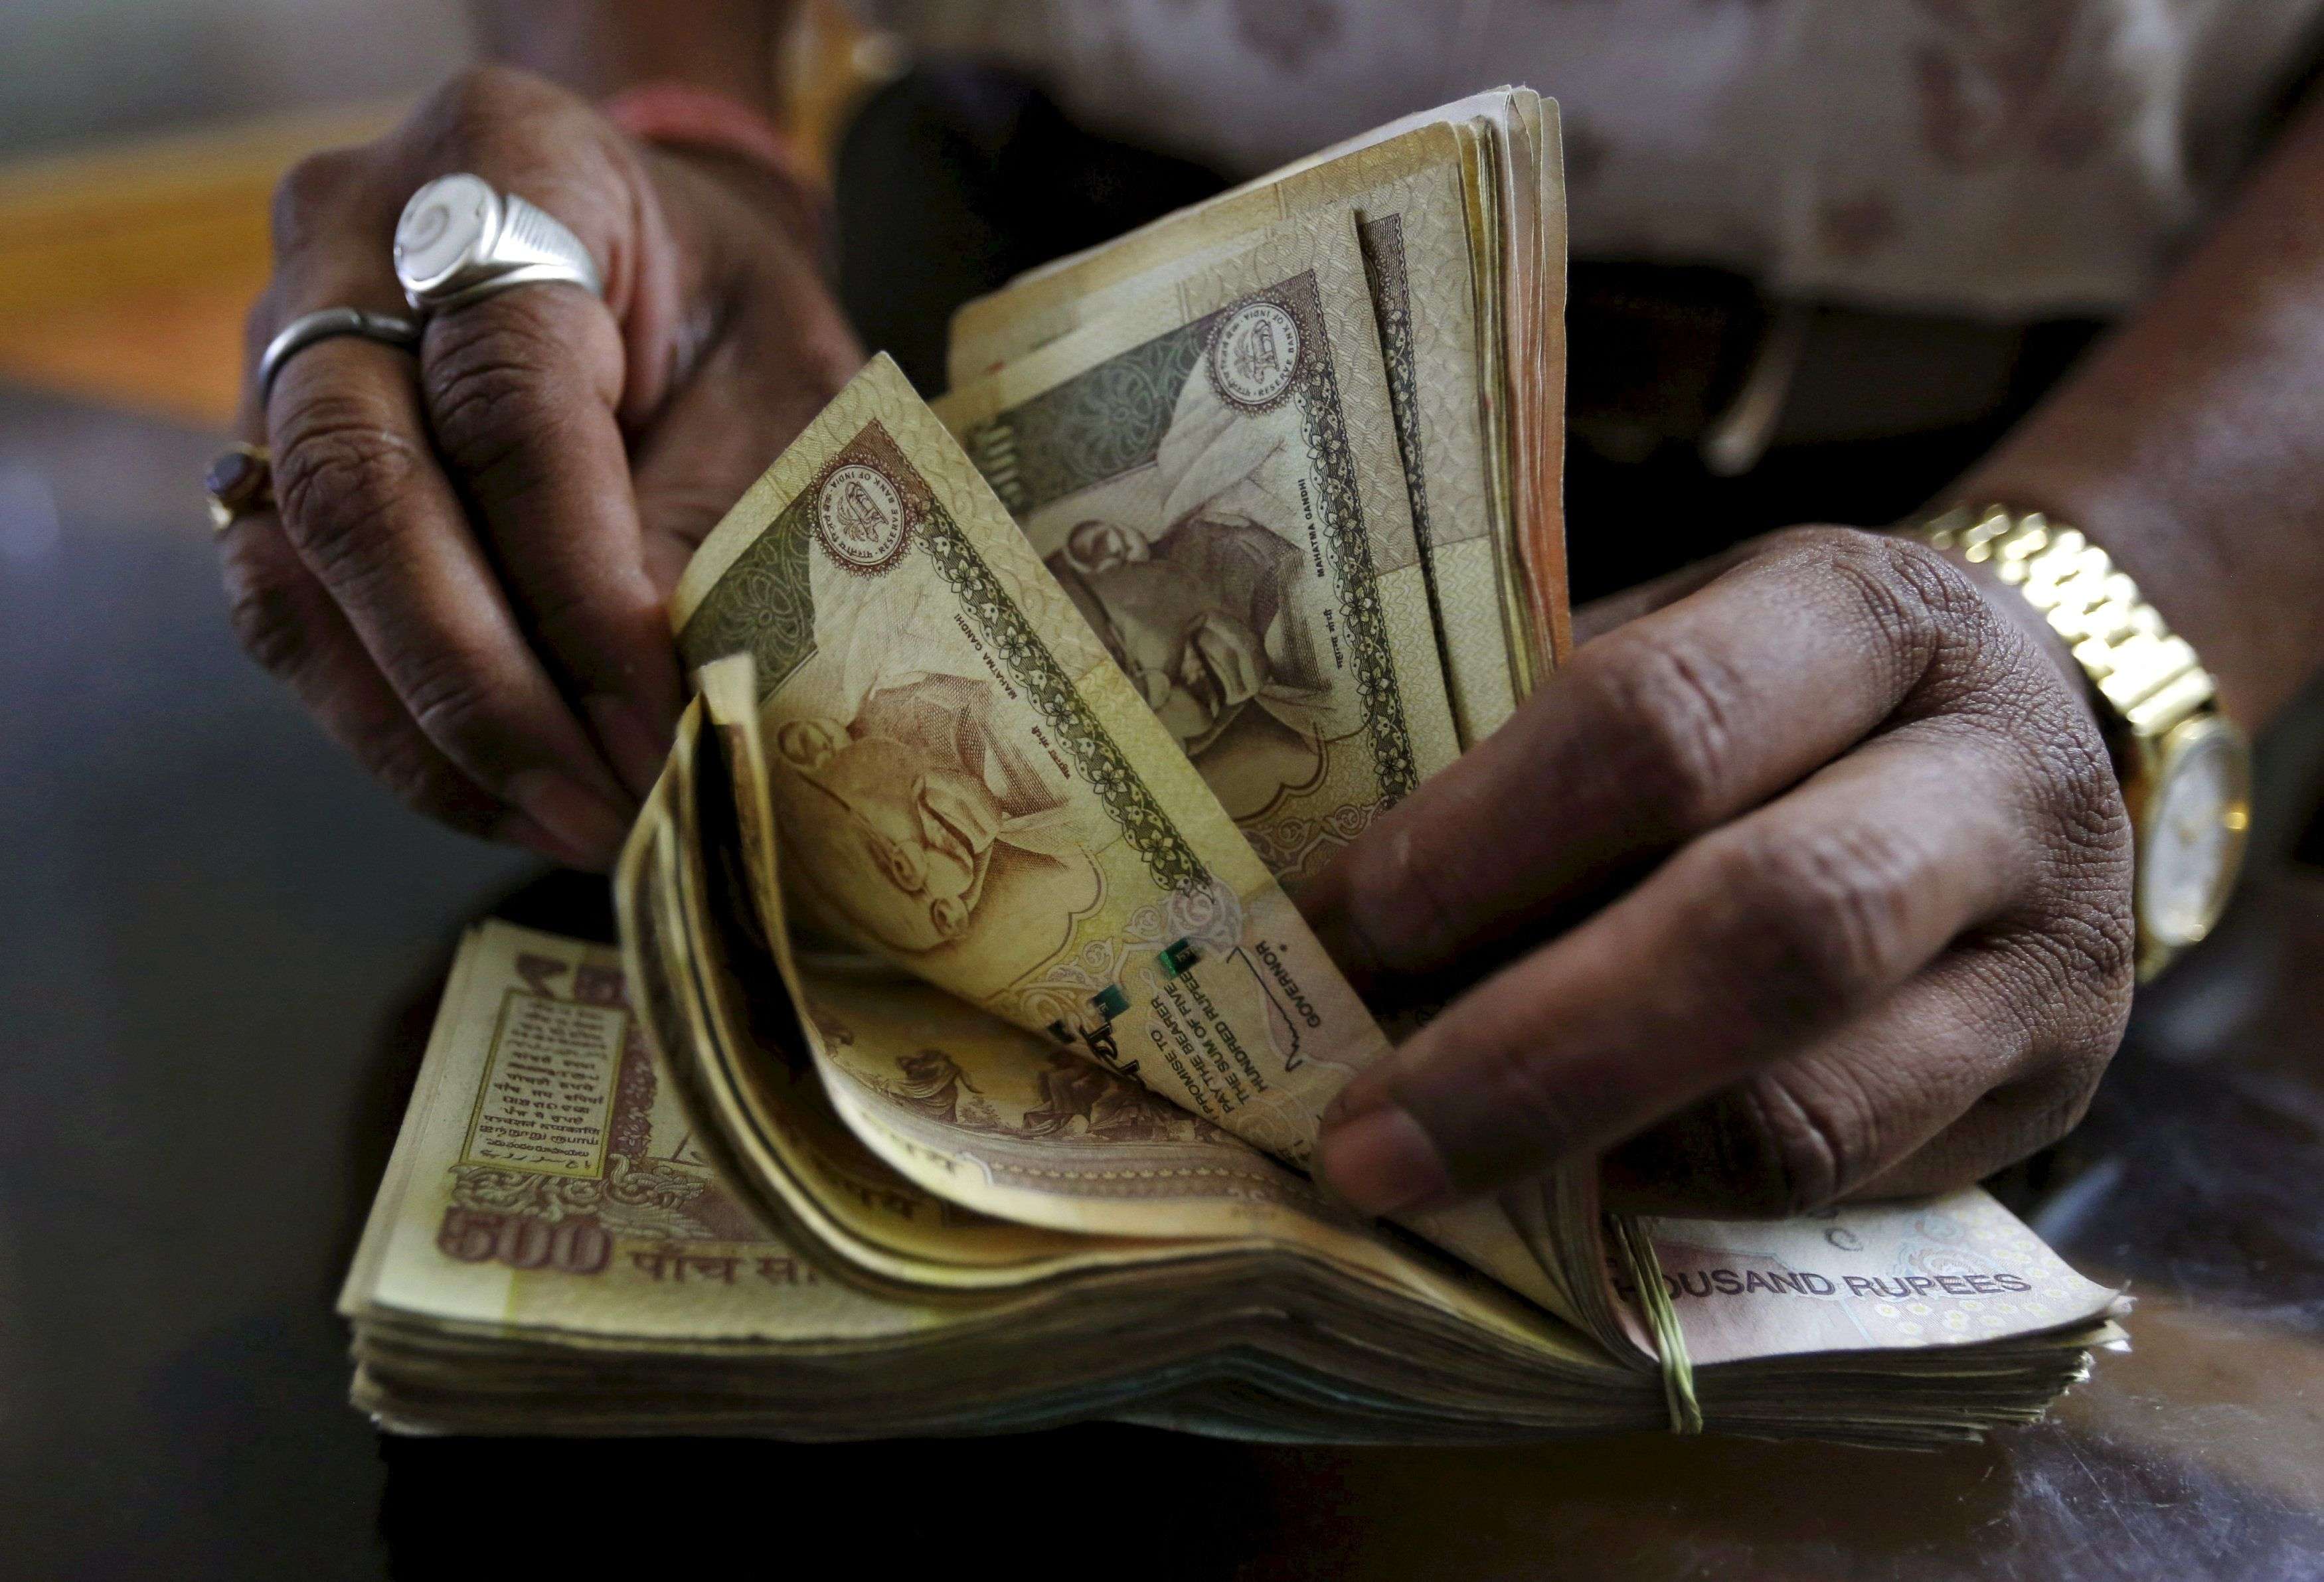 A money lender counts Indian rupee currency notes at his shop in Ahmedabad, India, May 6, 2015. REUTERS/Amit Dave/File Photo